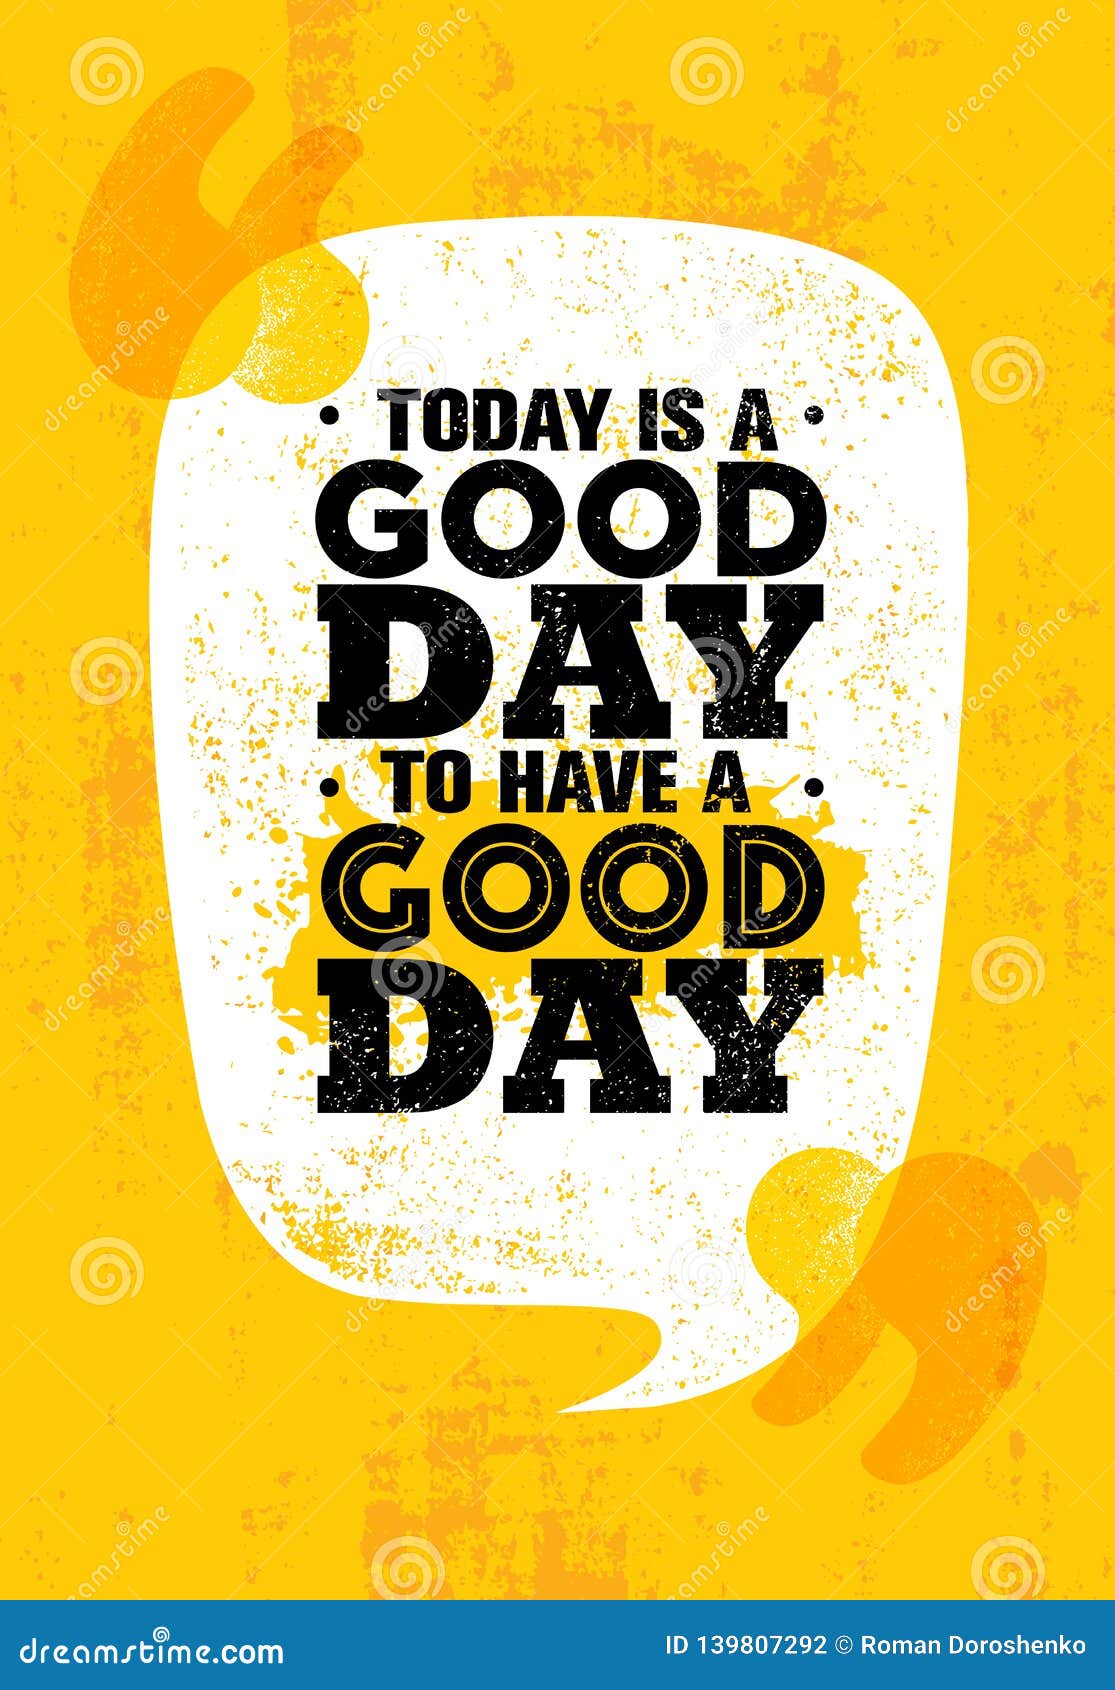 Today is a Good Day To Have a Good Day. Inspiring Creative ...